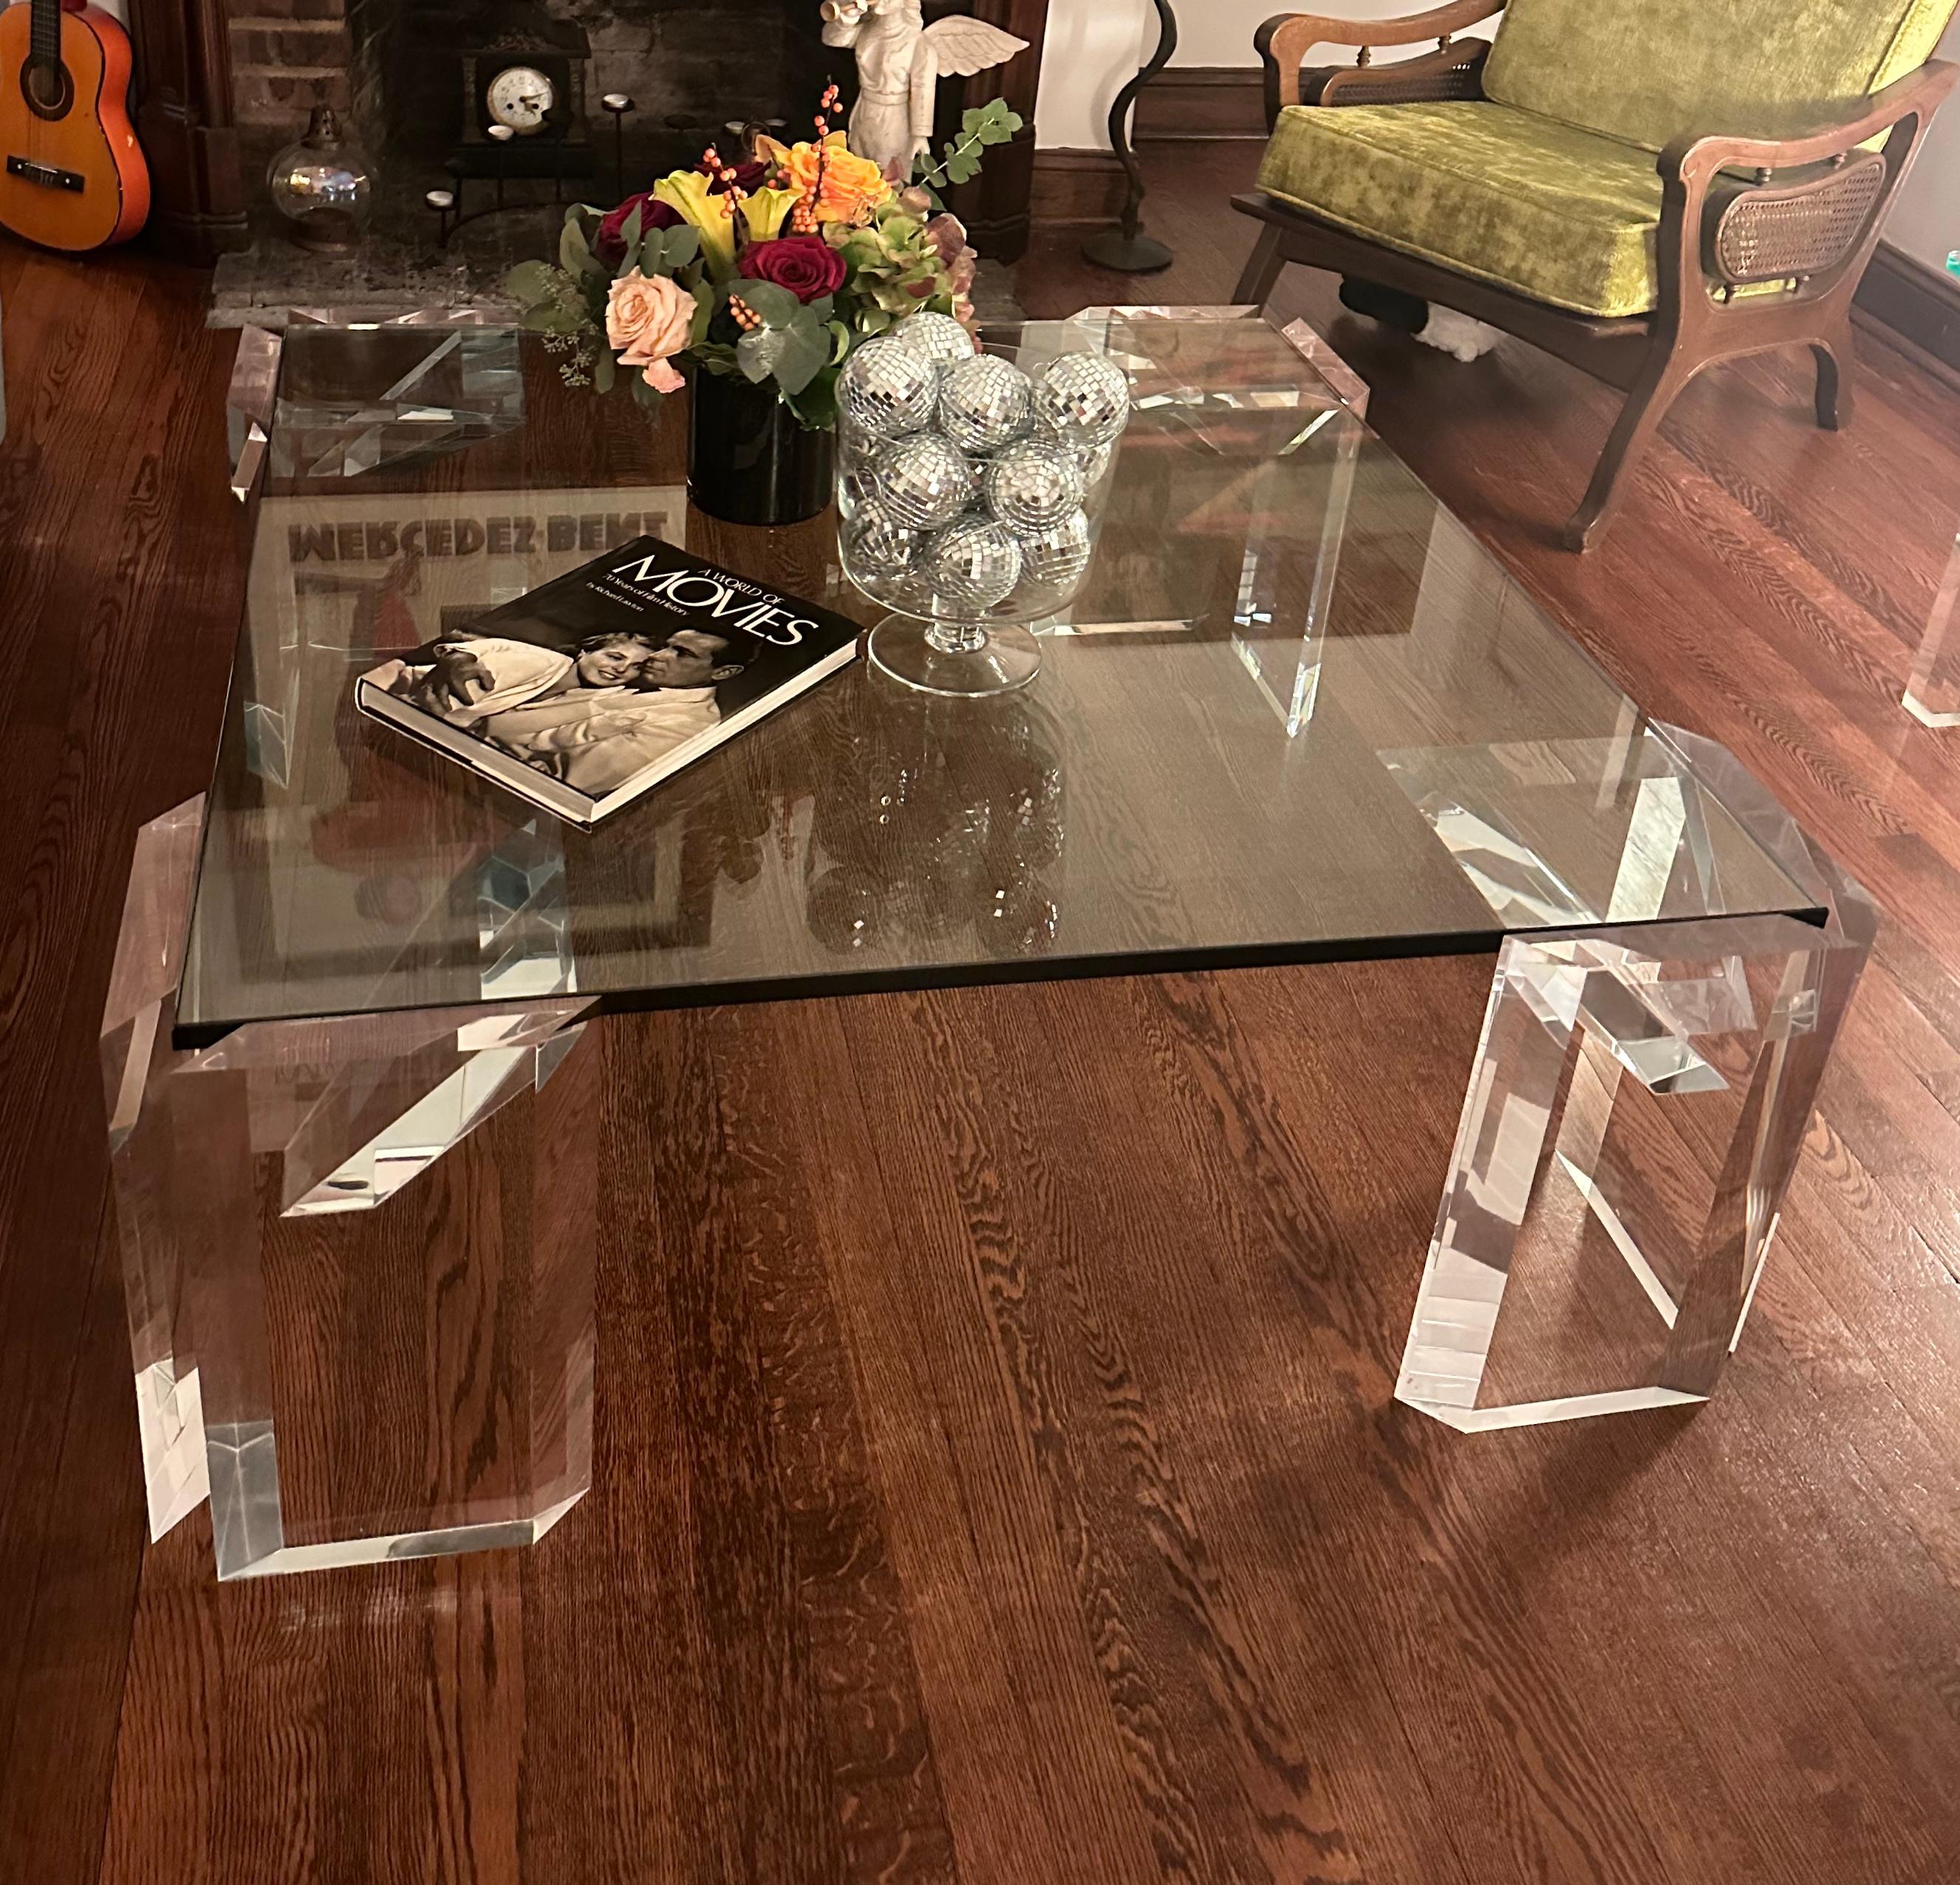 1980's Lucite and Glass coffee table, a stunning piece of furniture that exudes elegance and sophistication - features a 1-inch thick glass top that is not only functional but also adds a touch of modernity to the overall design. The glass top is